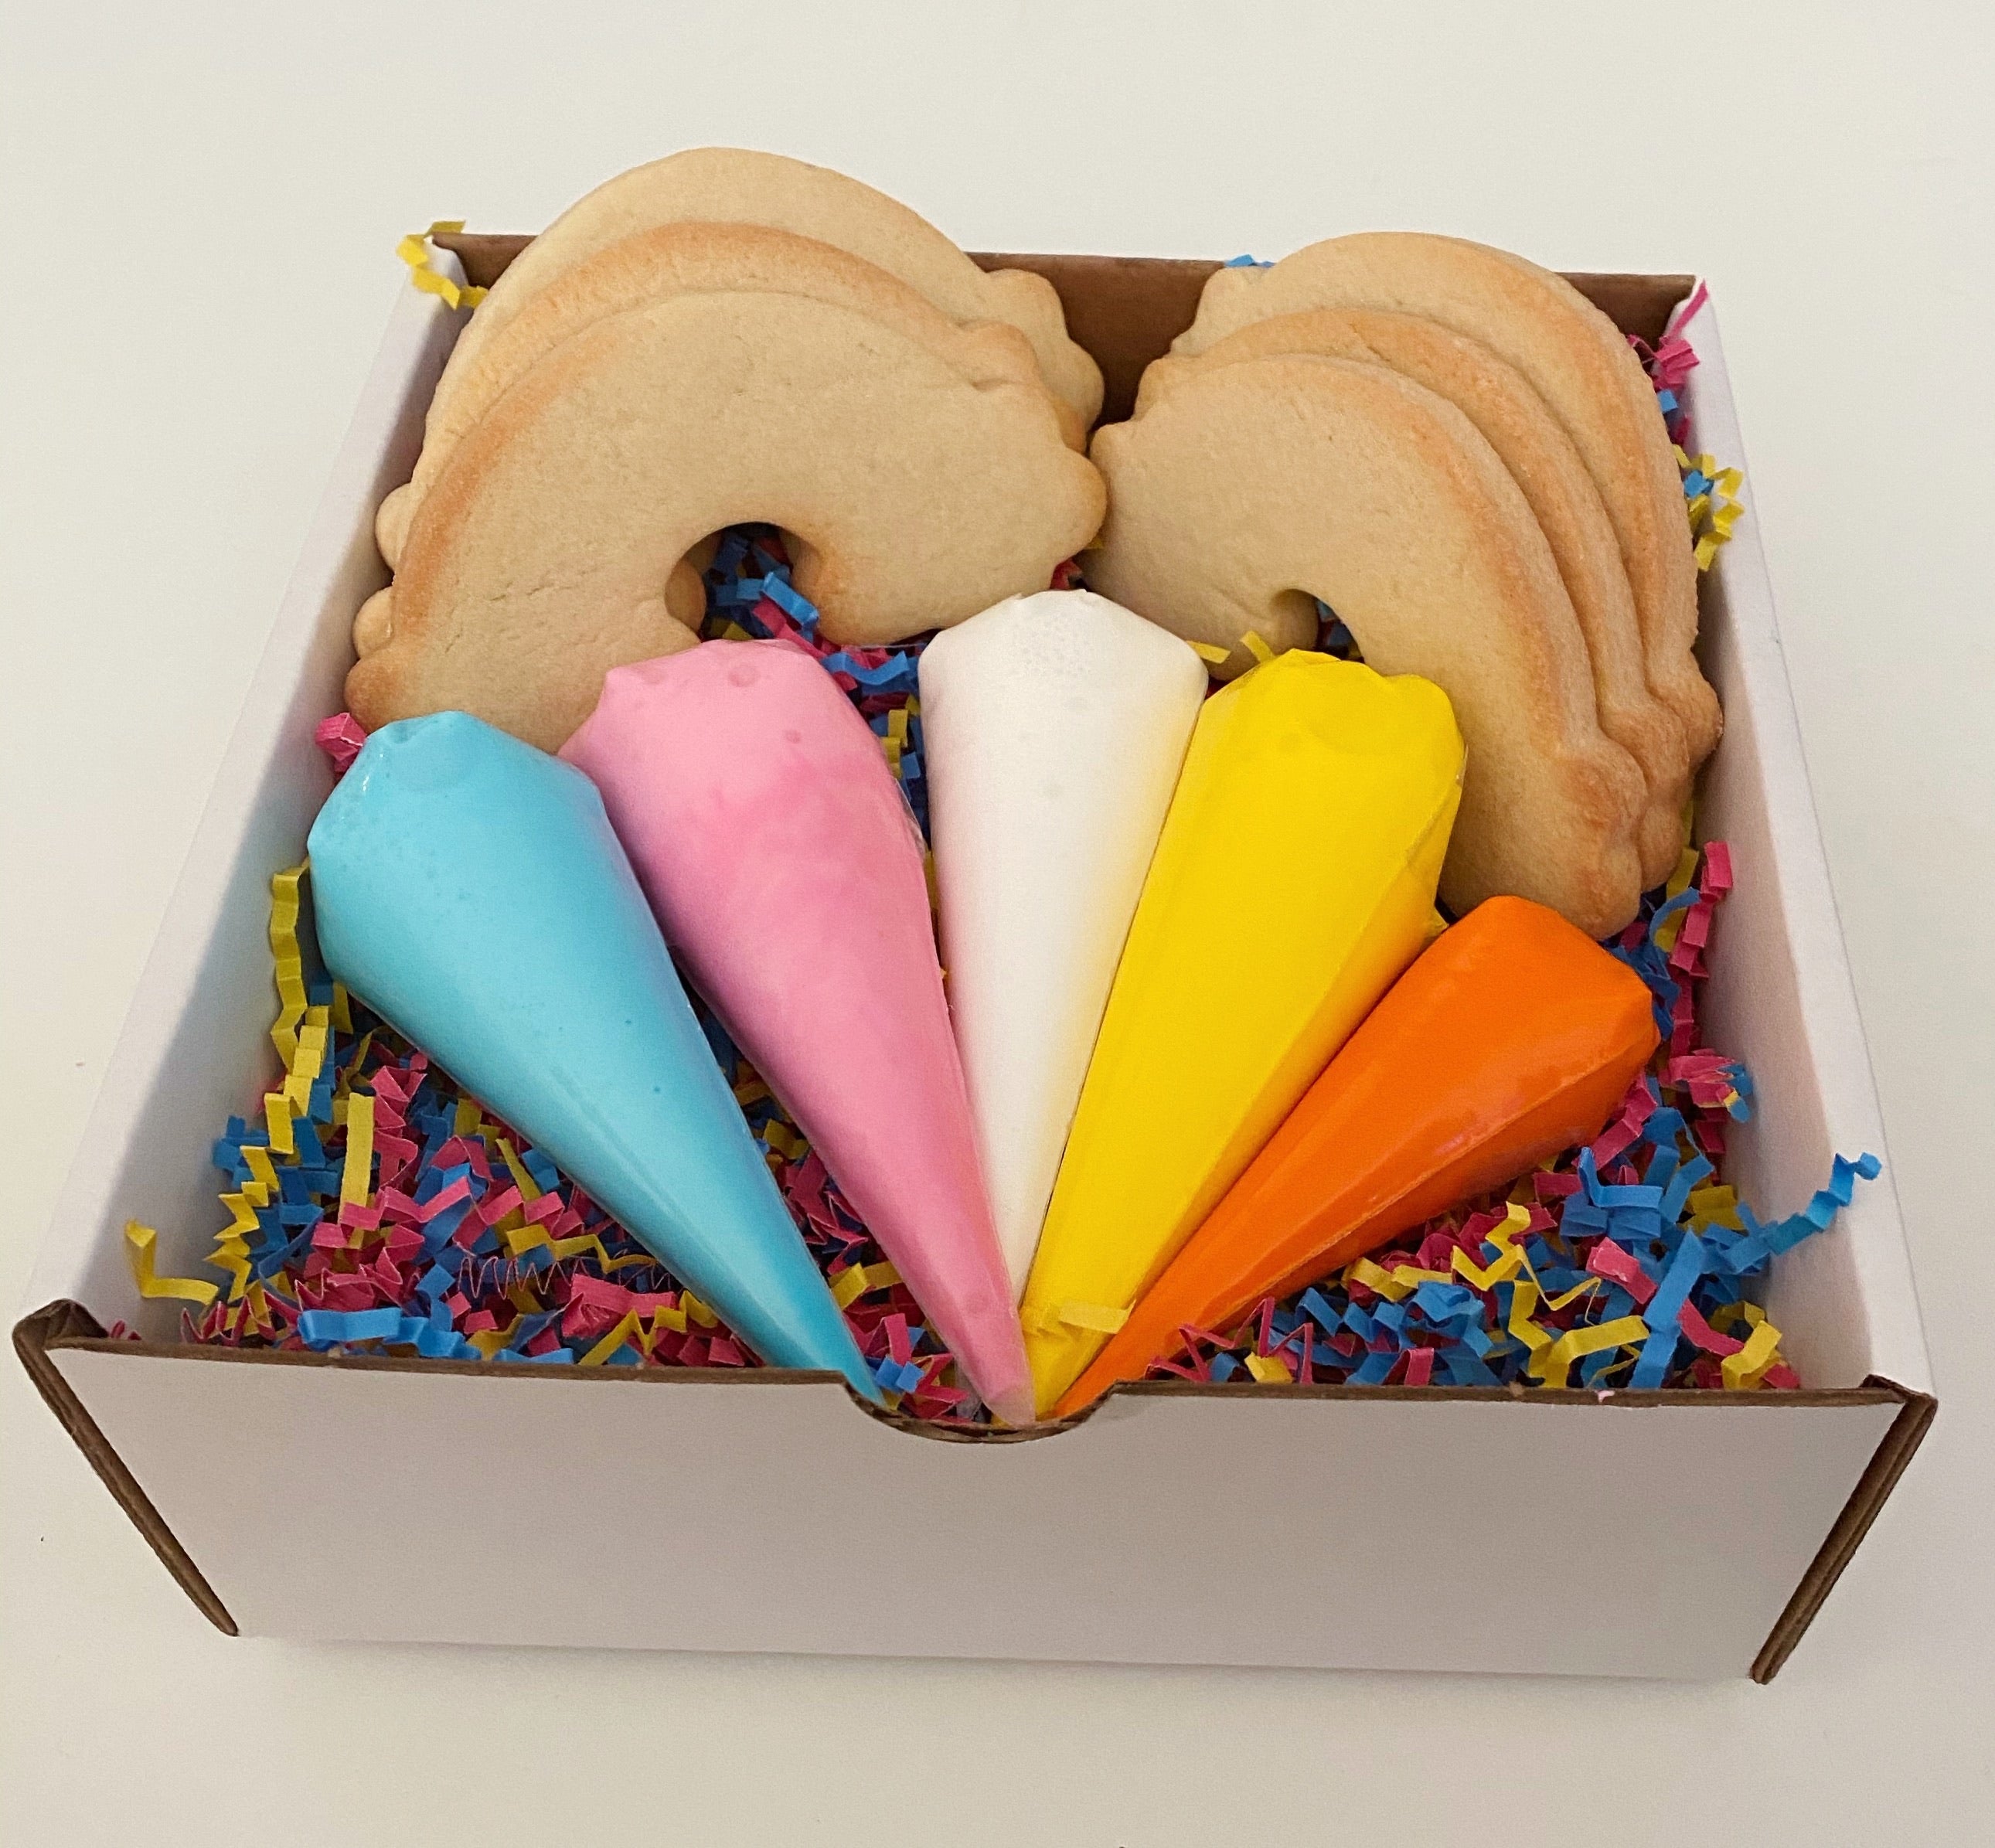 DECORATE YOUR OWN RAINBOW COOKIE KIT